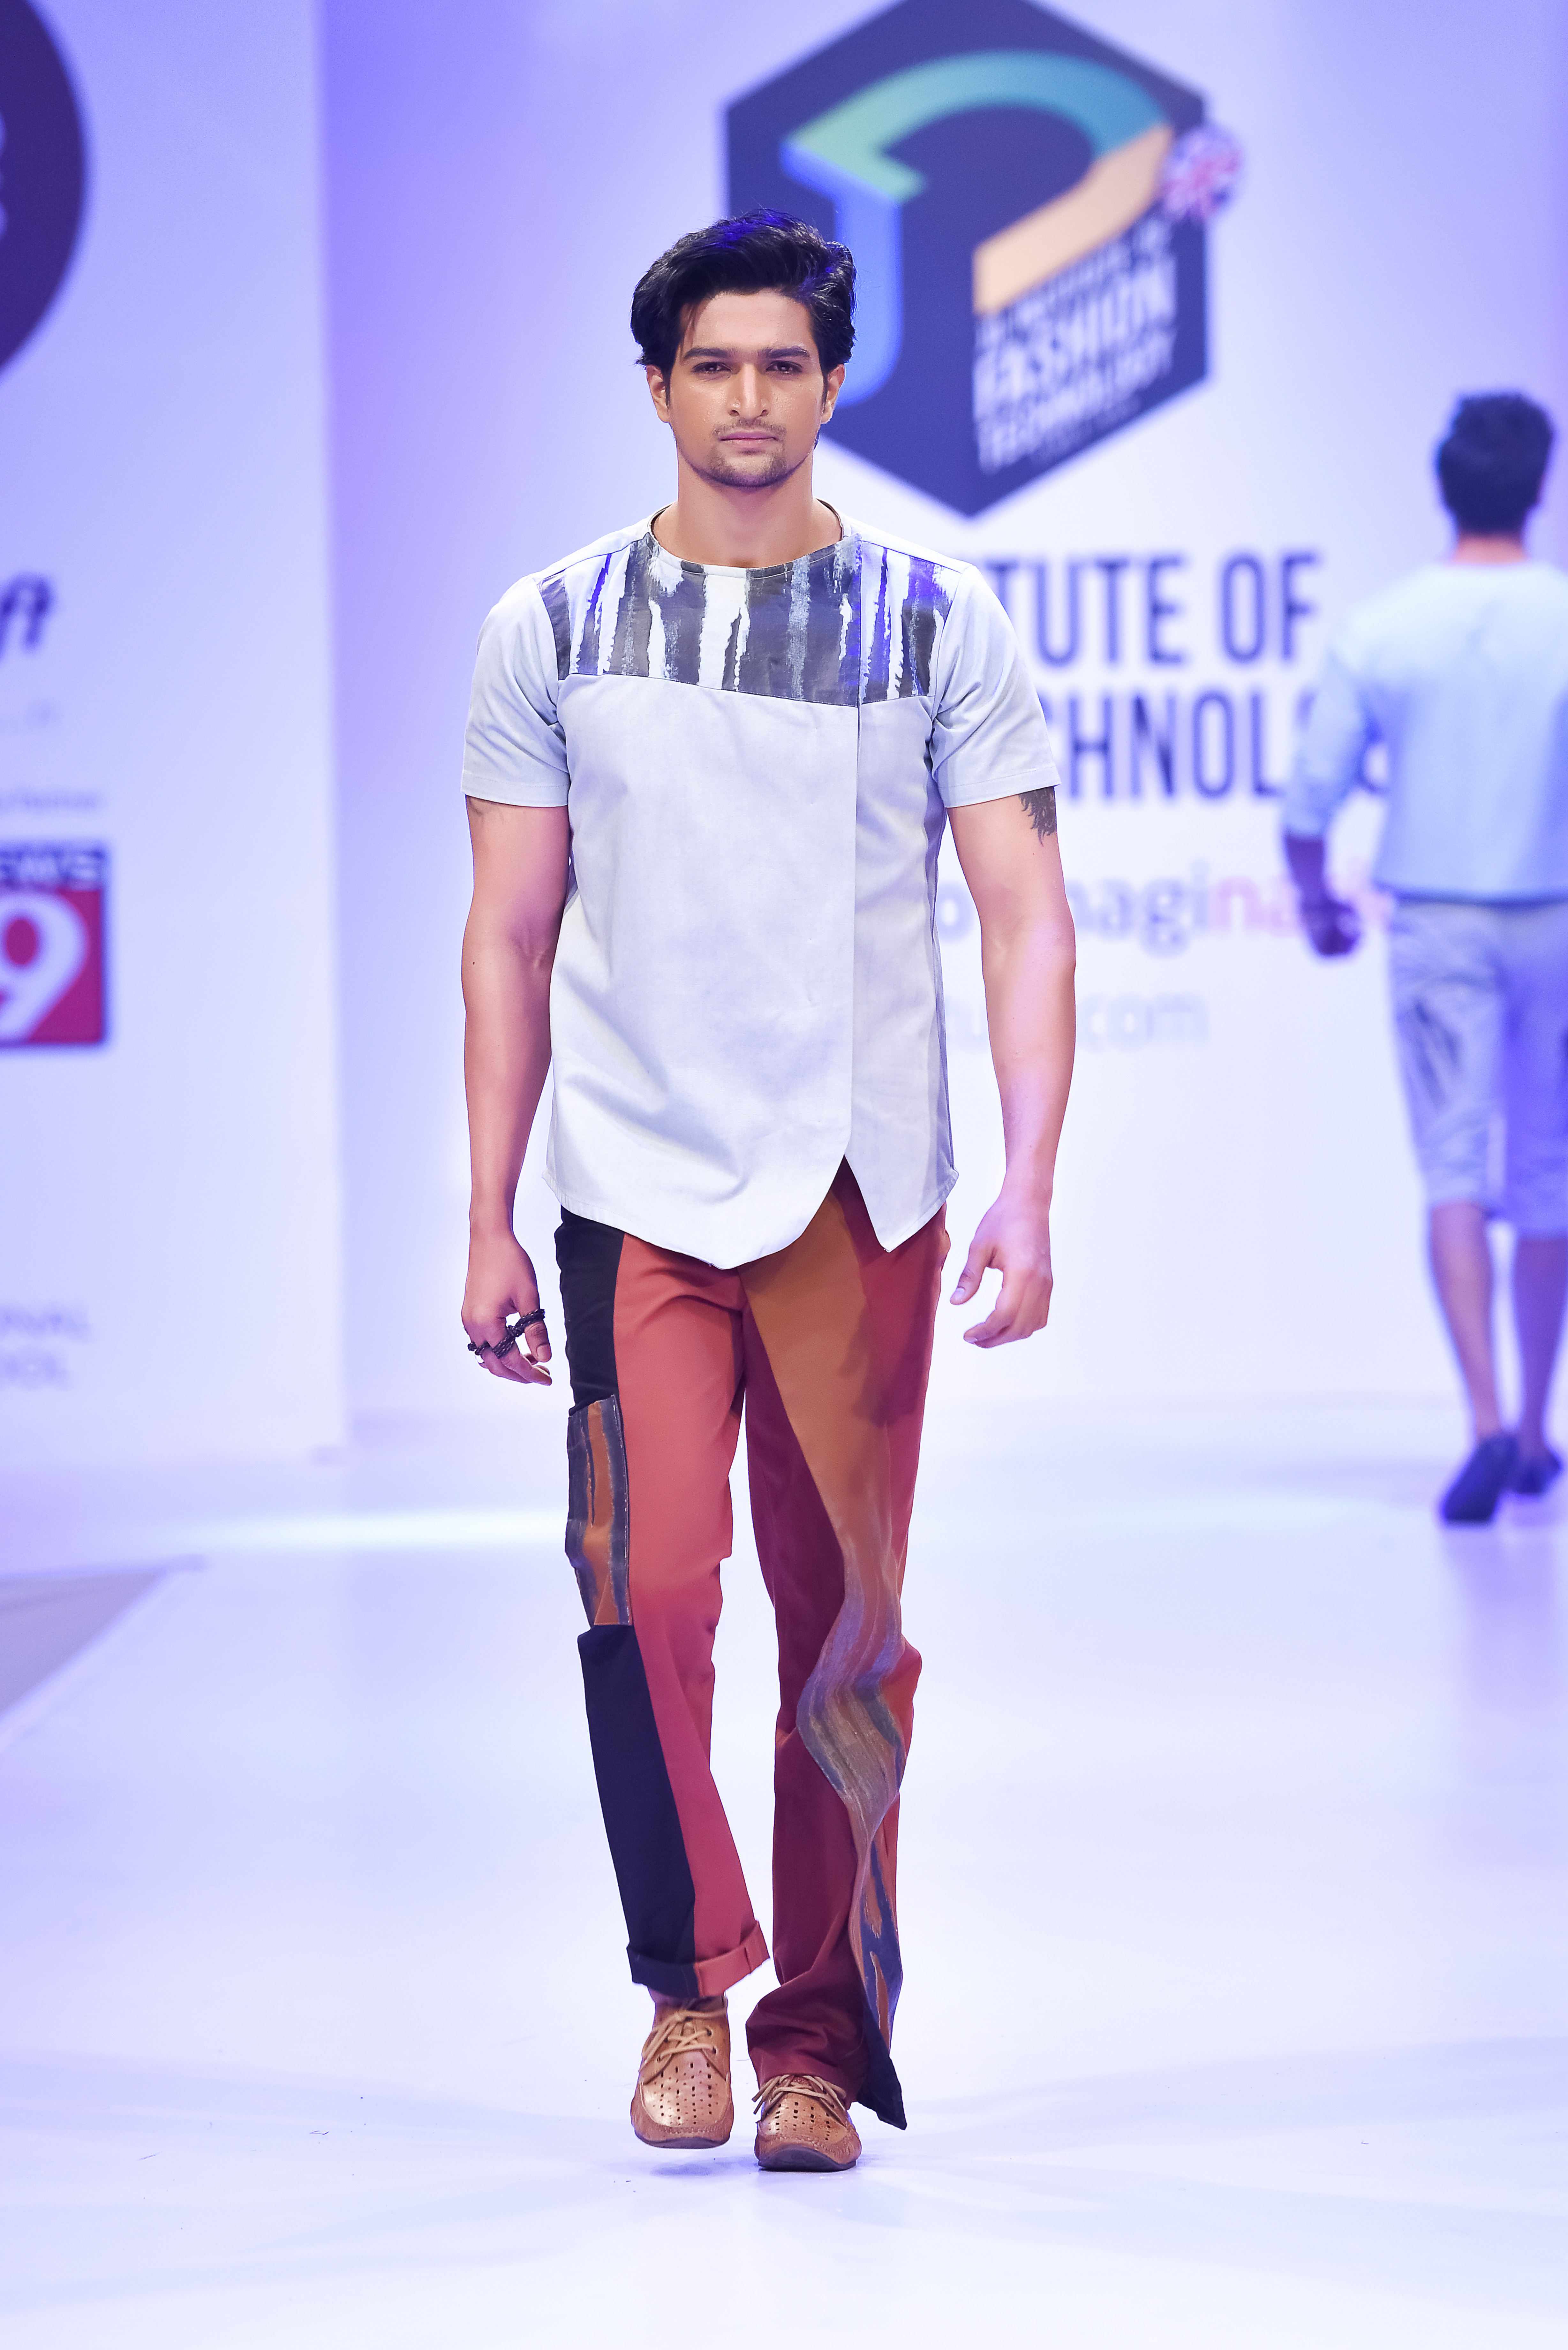 JD Institute of Fashion Technology's 28th Annual Design Awards